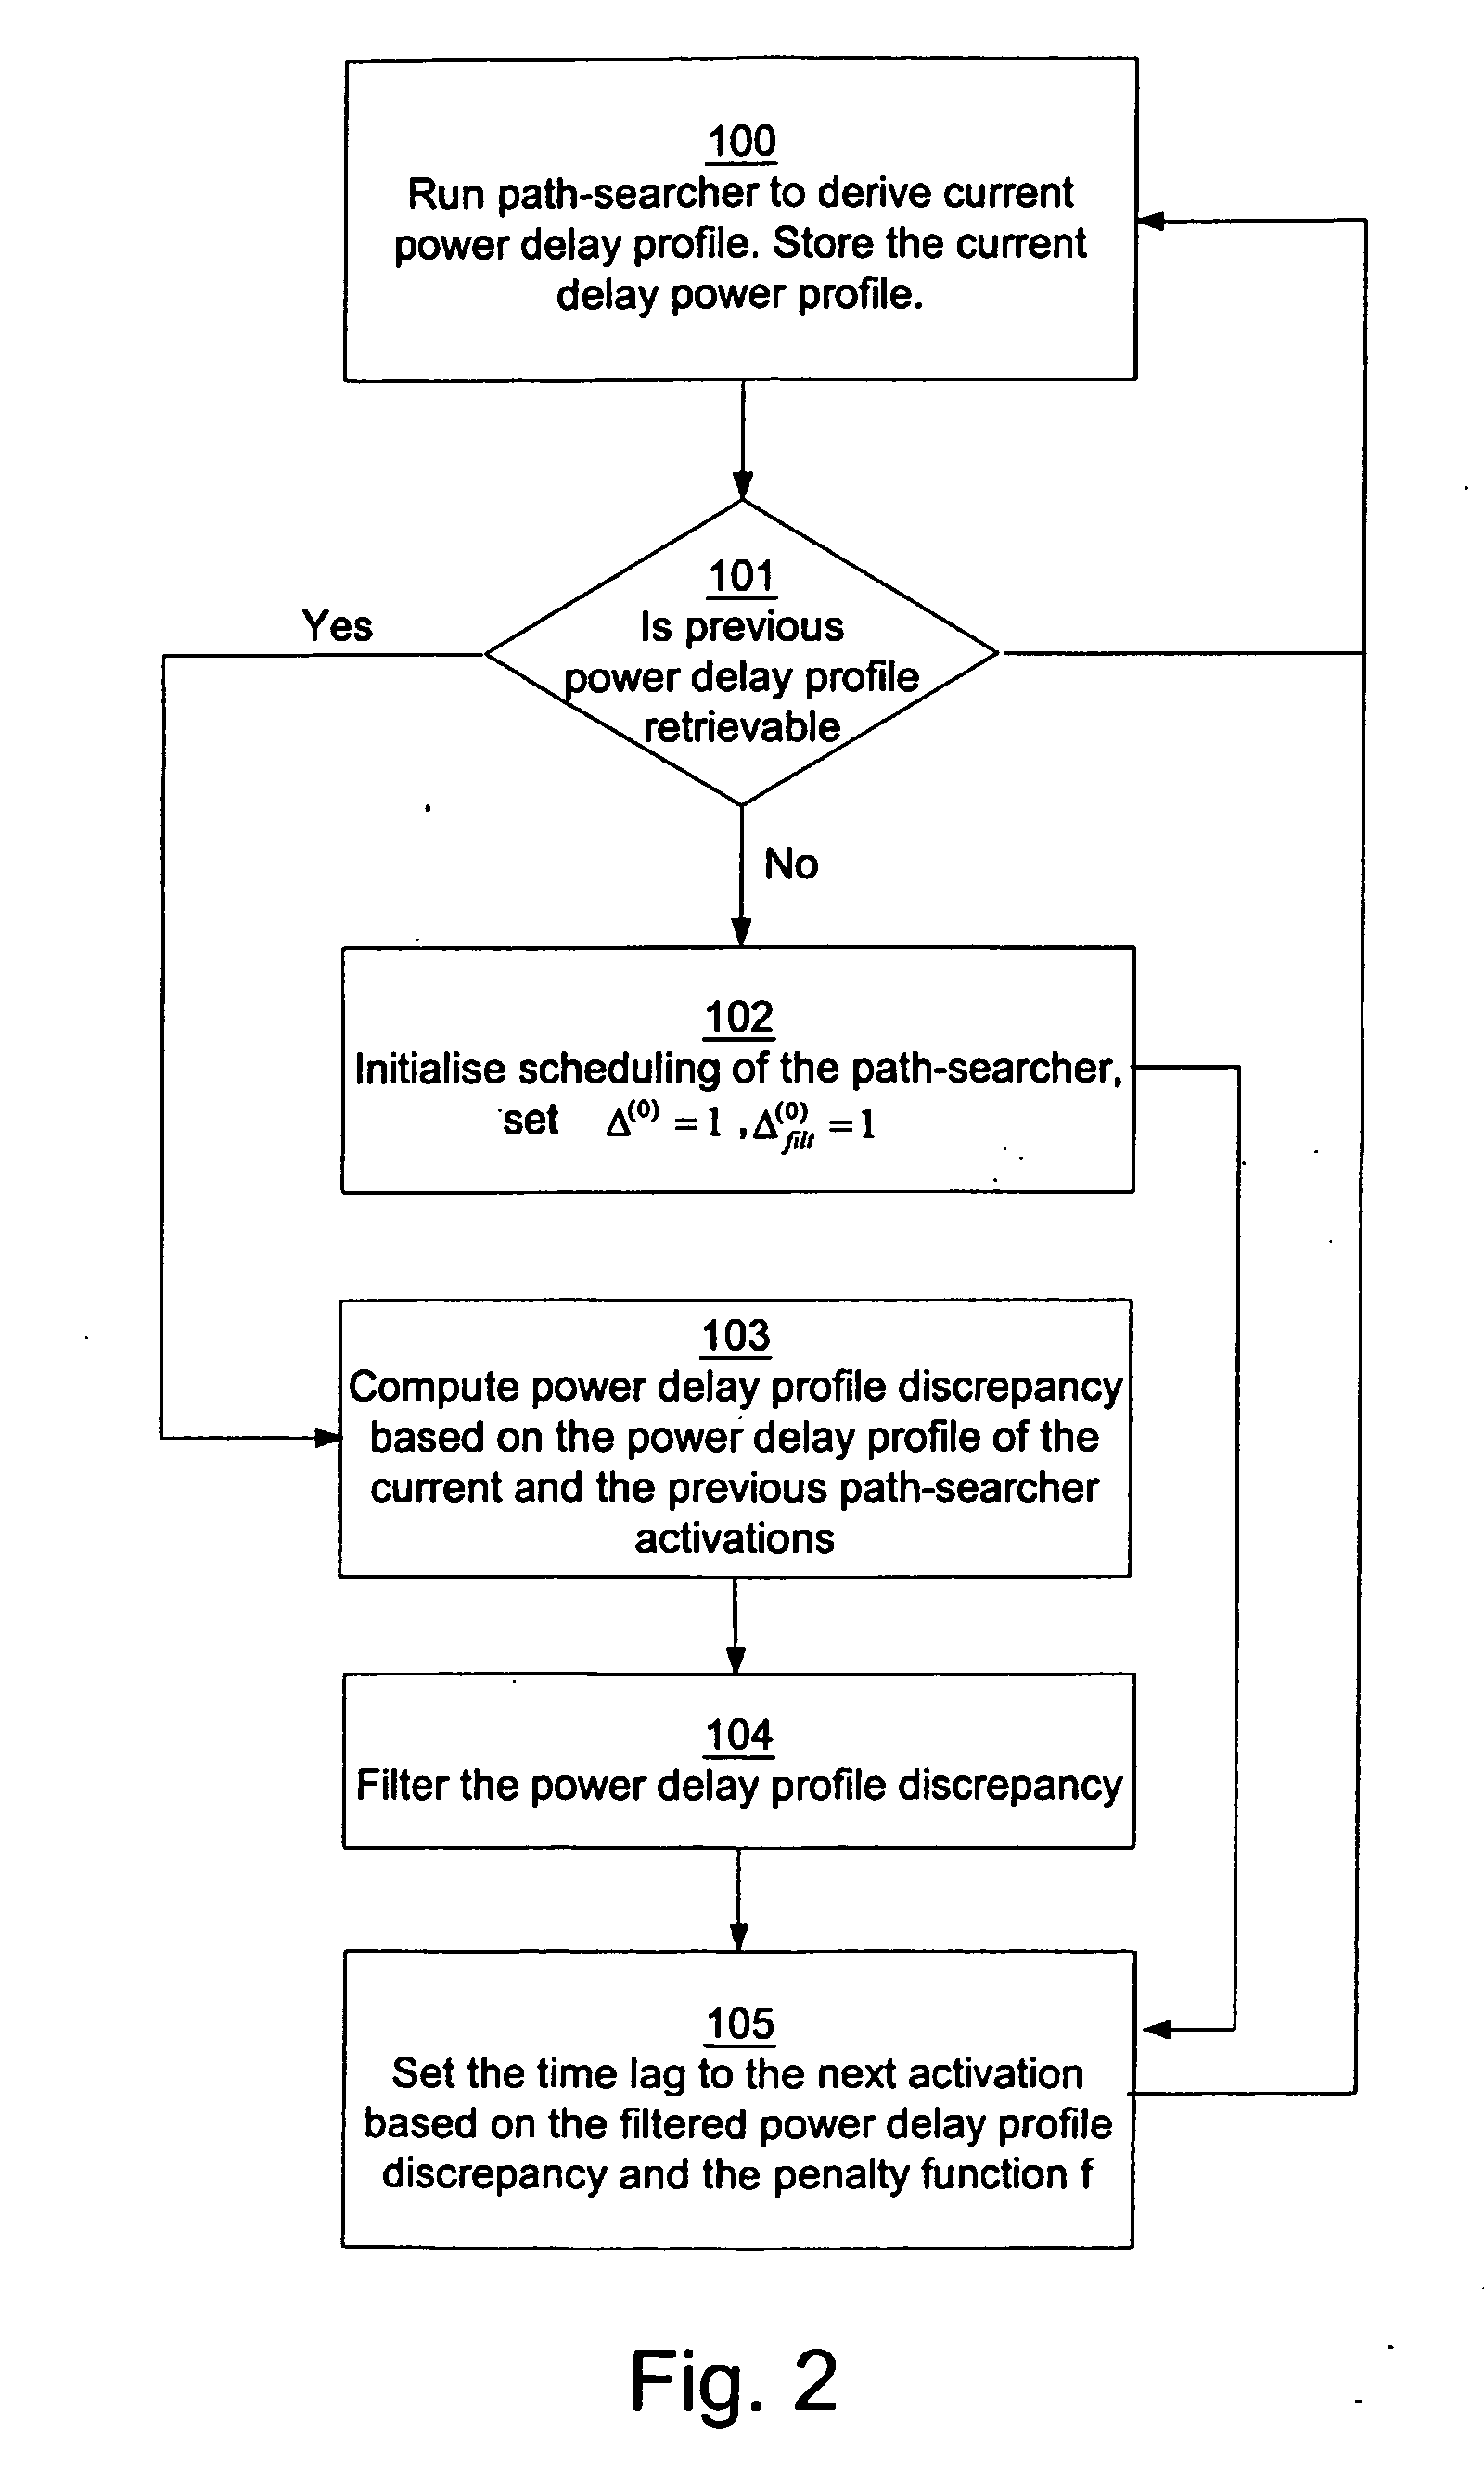 Method for path-seacher scheduling